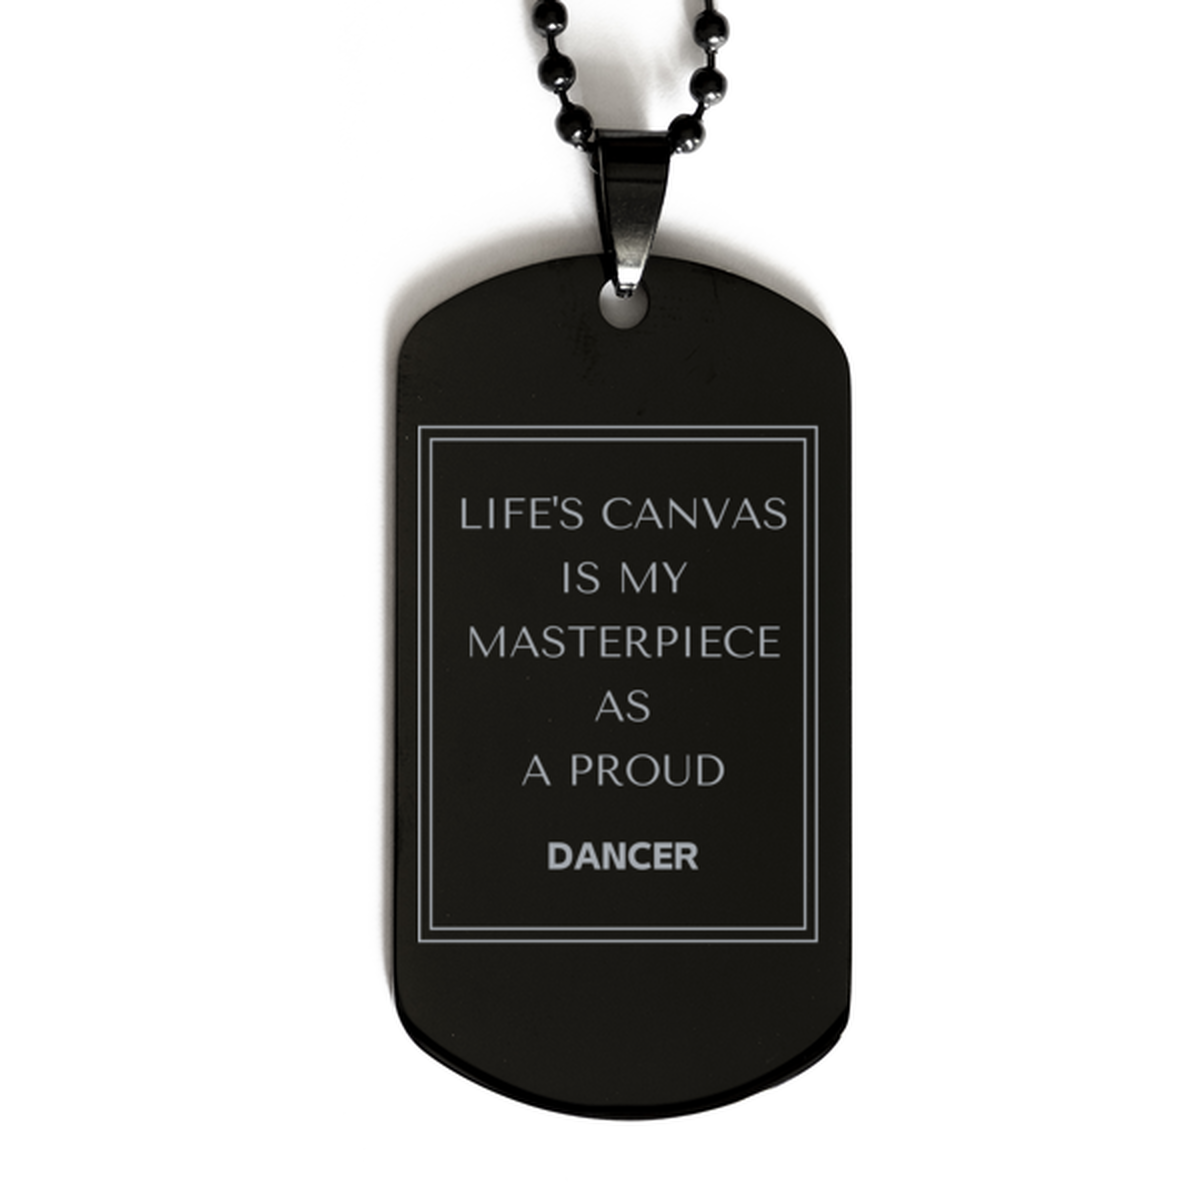 Proud Dancer Gifts, Life's canvas is my masterpiece, Epic Birthday Christmas Unique Black Dog Tag For Dancer, Coworkers, Men, Women, Friends